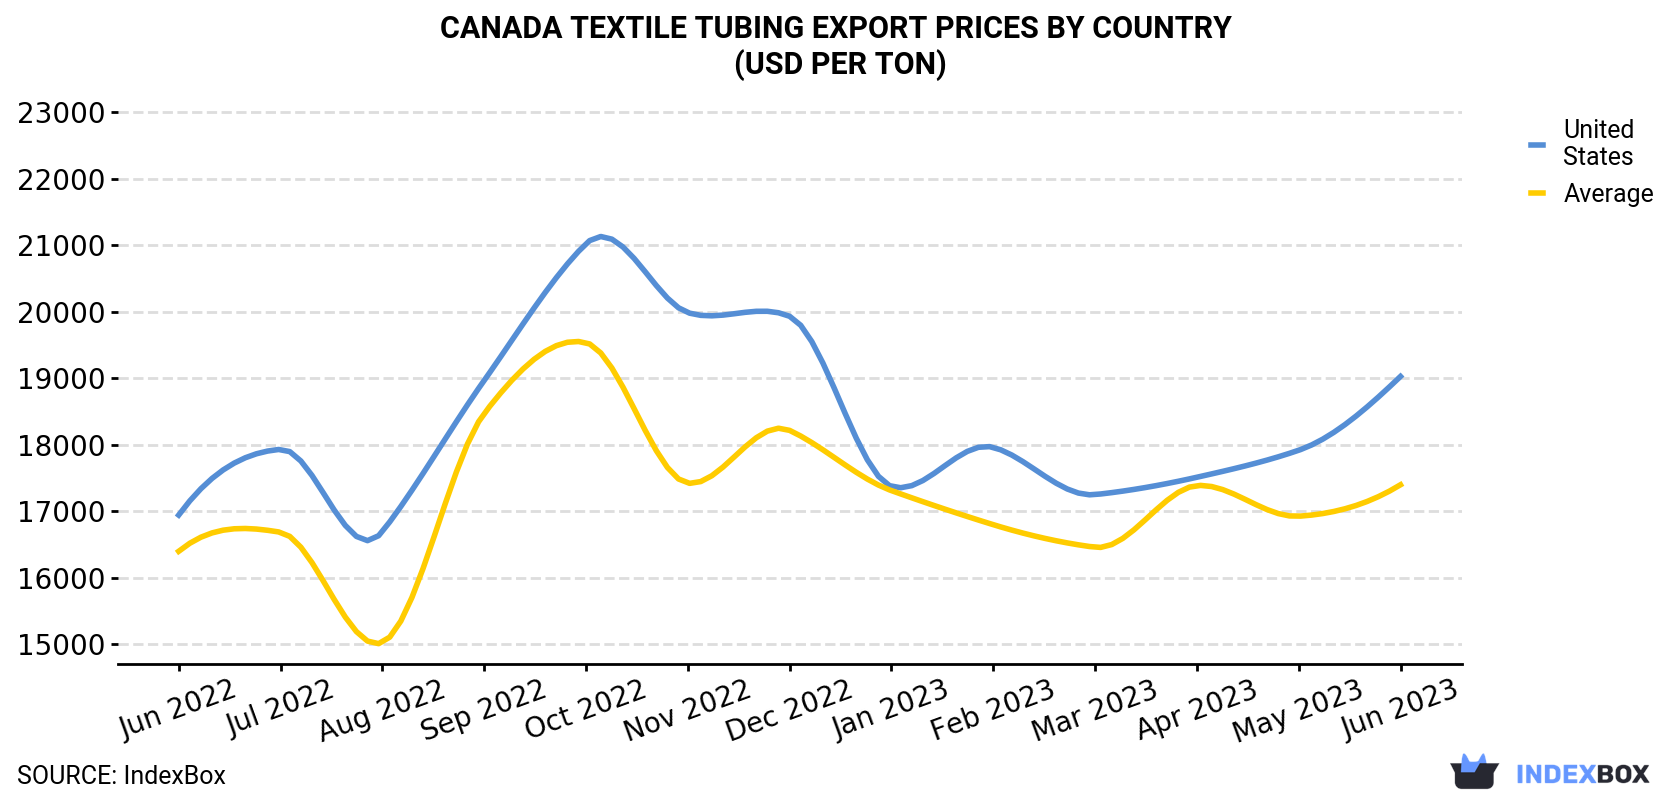 Canada Textile Tubing Export Prices By Country (USD Per Ton)